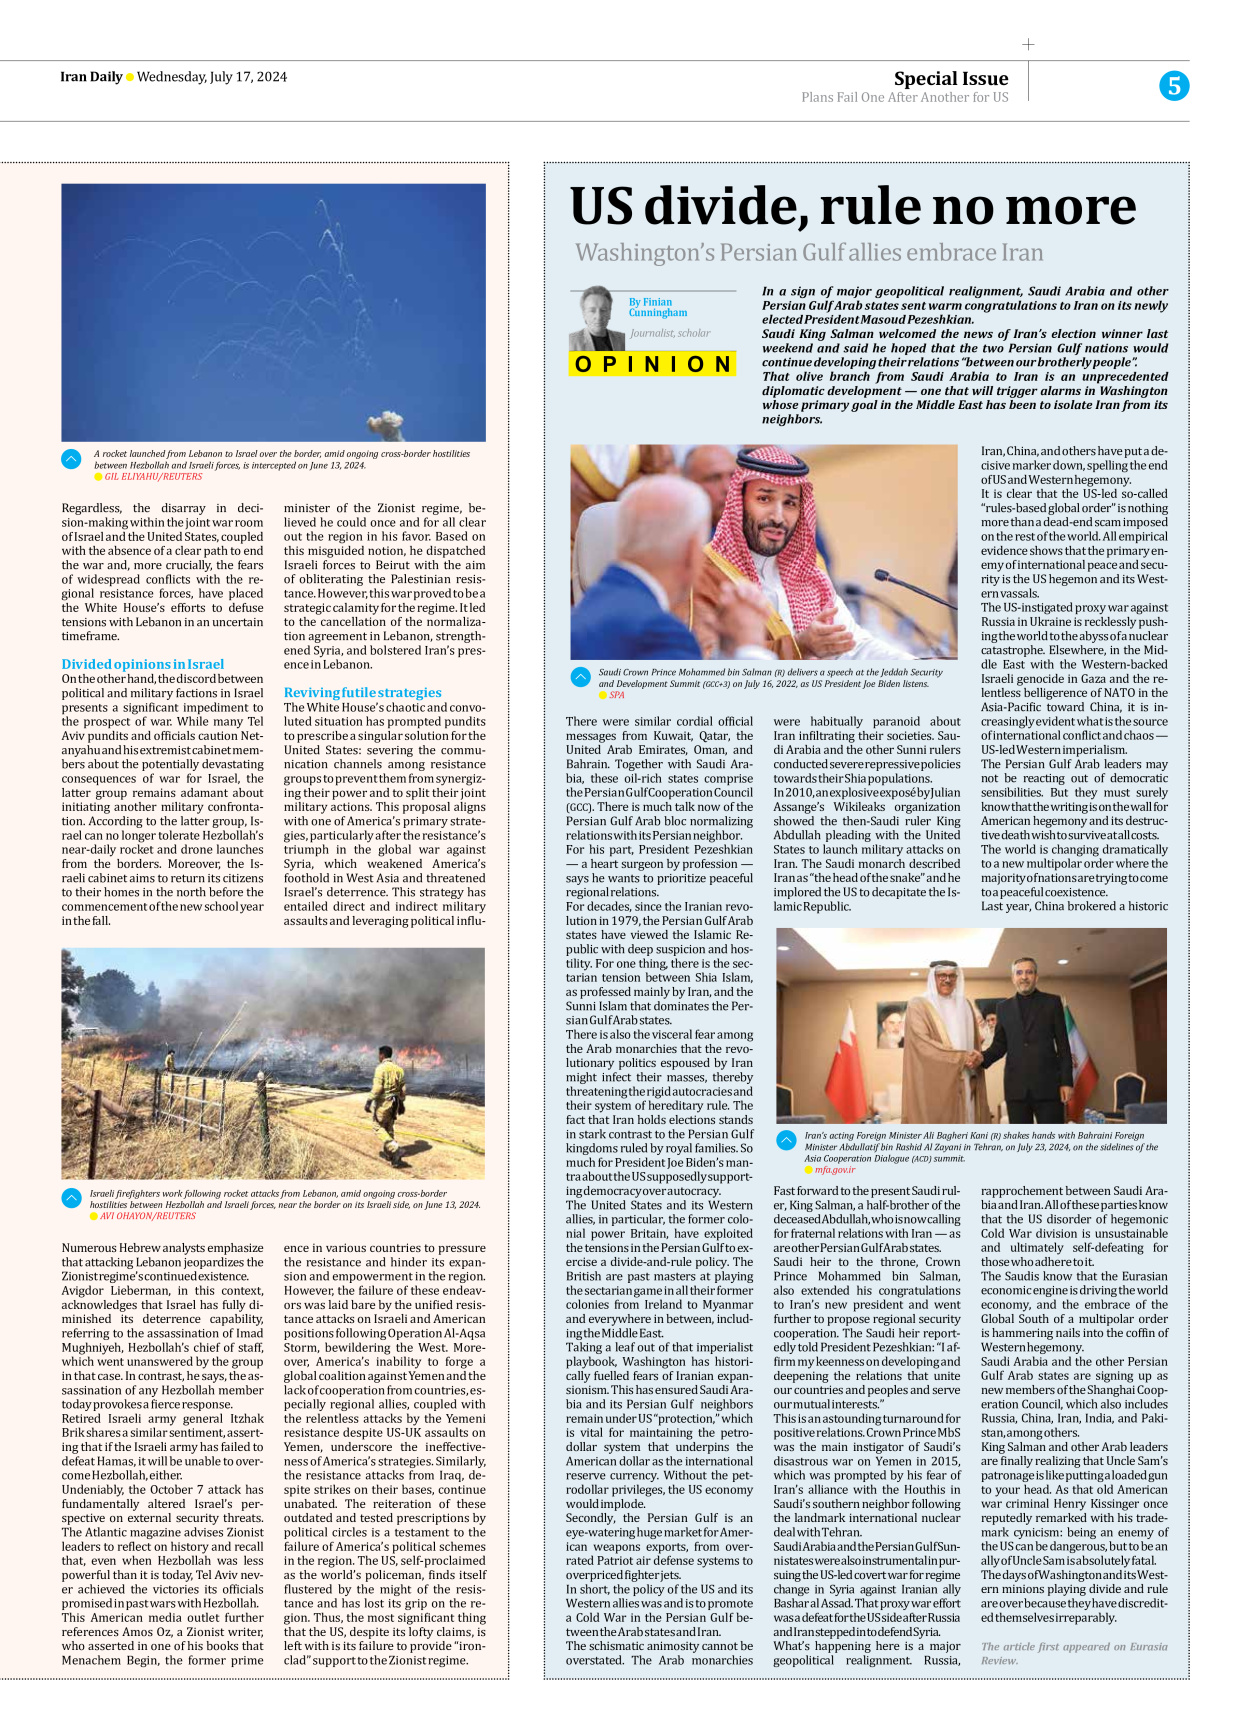 Iran Daily - Number Seven Thousand Six Hundred and Five - 17 July 2024 - Page 5